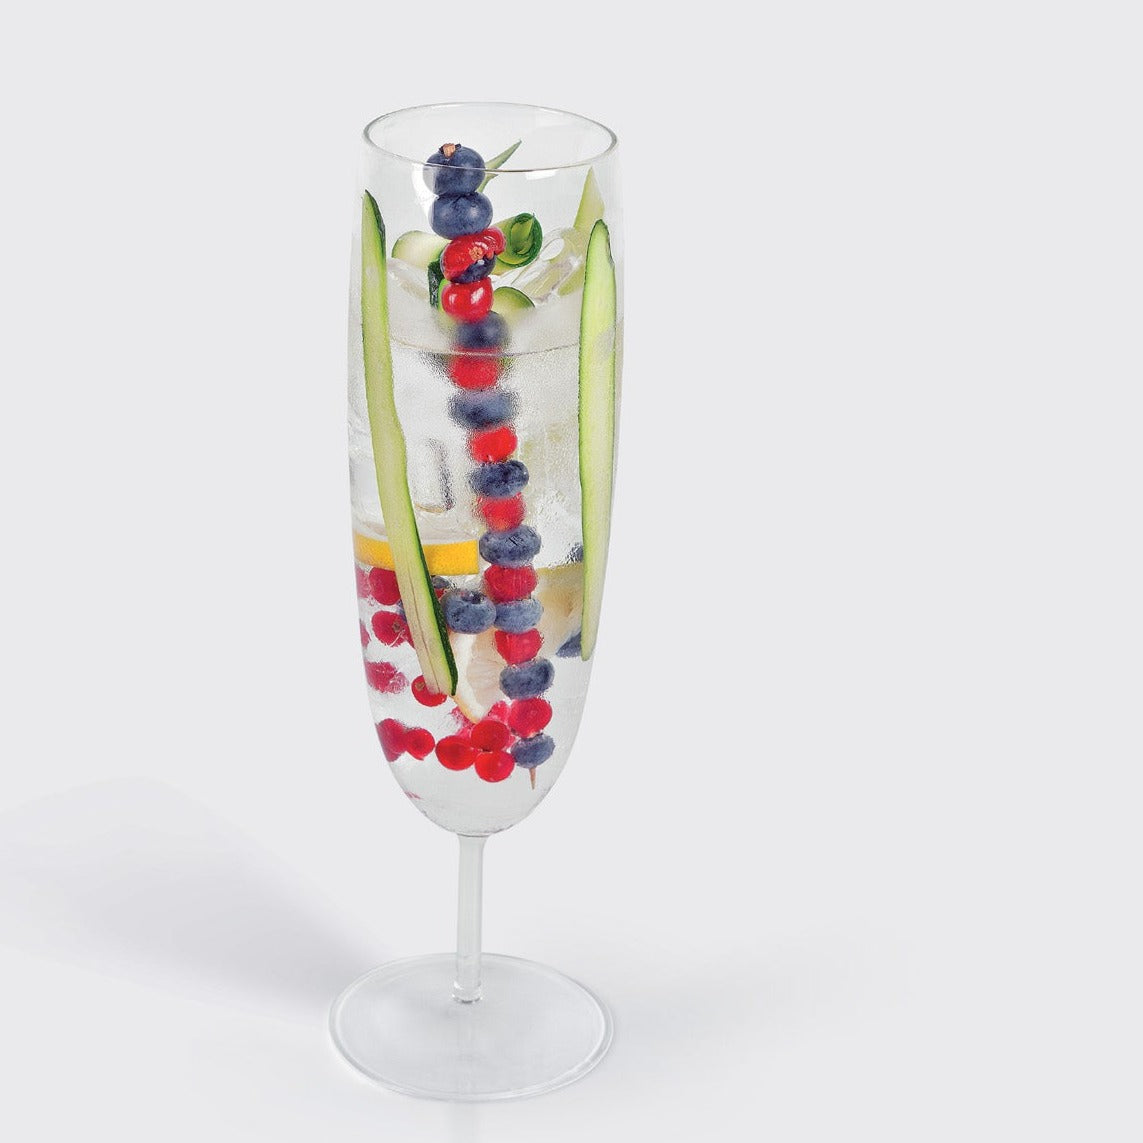 Cucumber, cocktail and beer glass